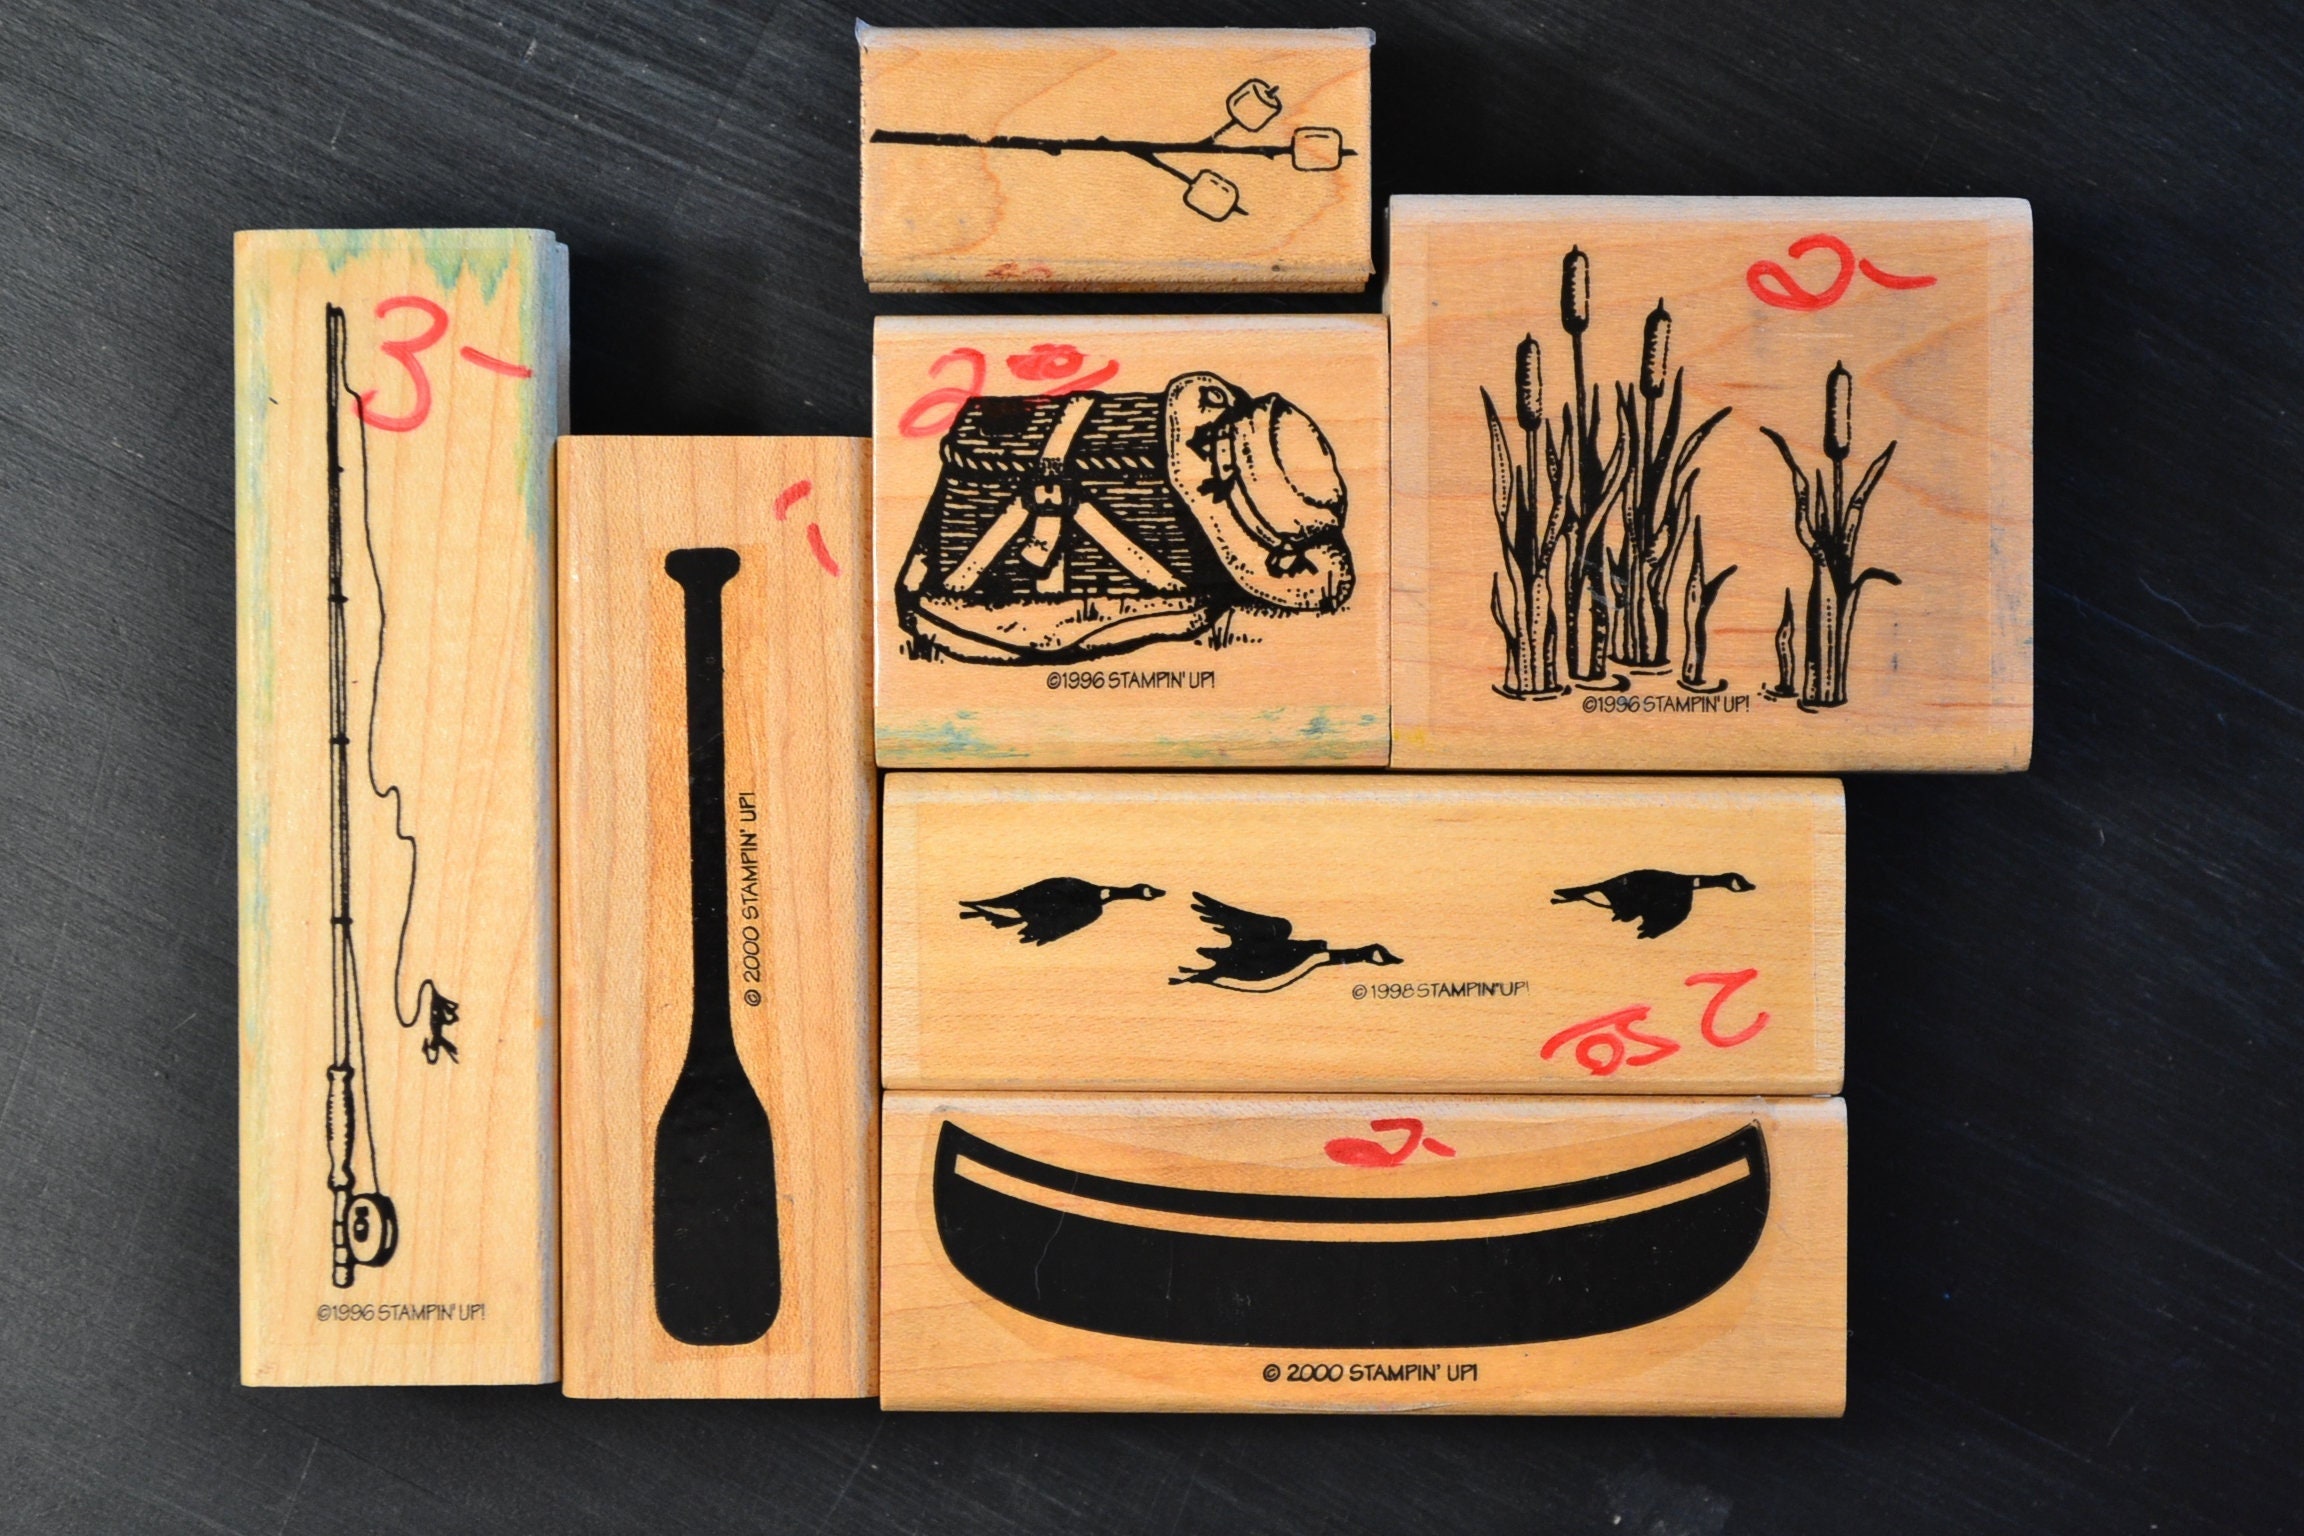 Lot of 7 Camping Themed Stamps Stampin' Up Roughin It Destash Variety Canoe Paddle  Fishing Pole Marshmallows Mounted Rubber Wooden Stamps 